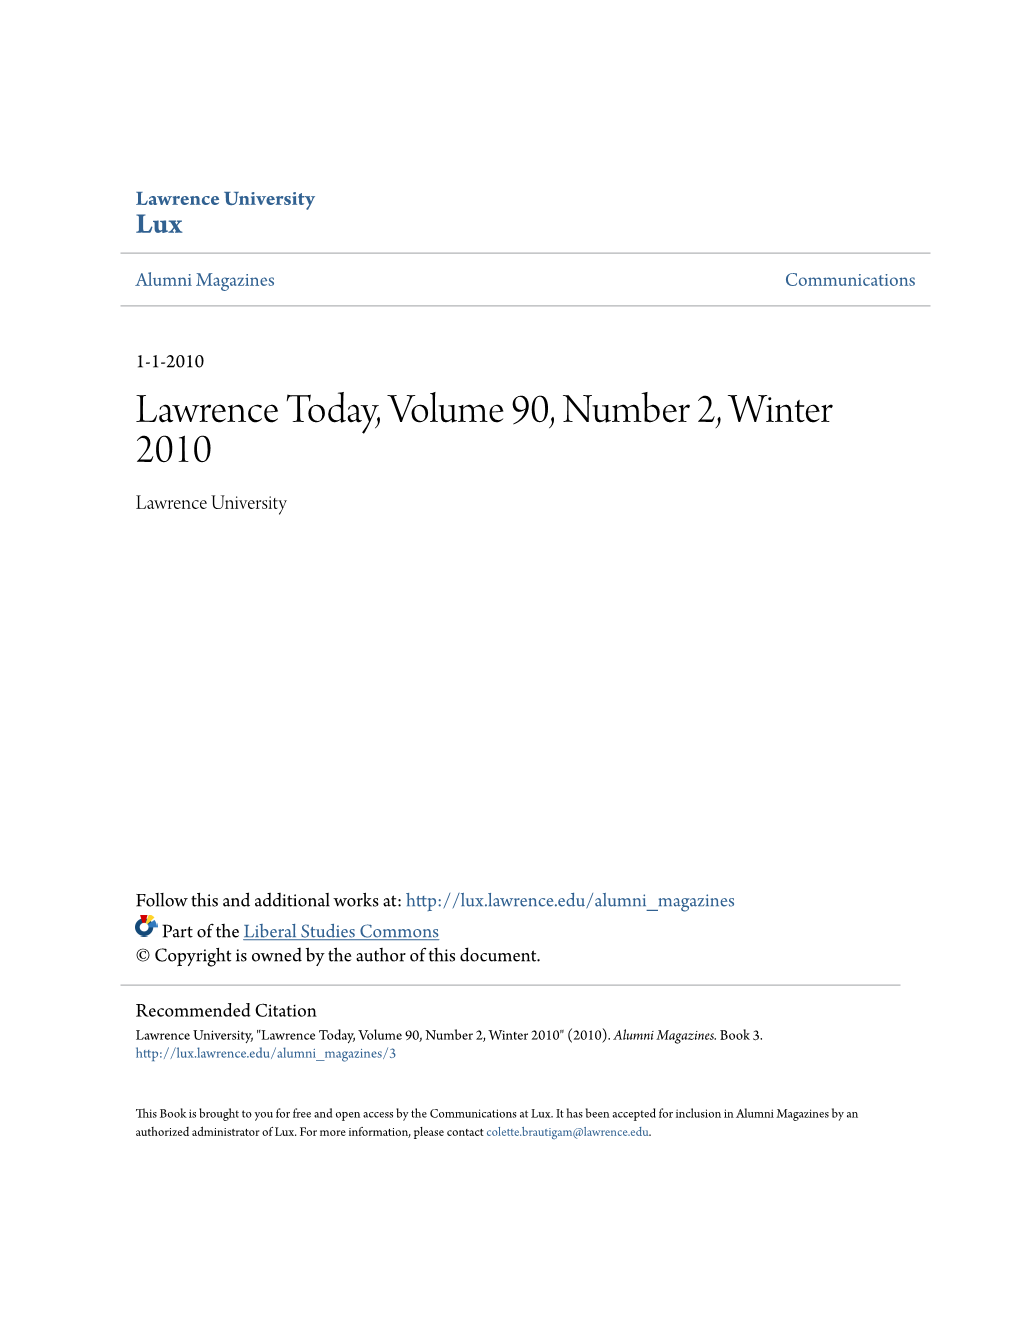 Lawrence Today, Volume 90, Number 2, Winter 2010 Lawrence University